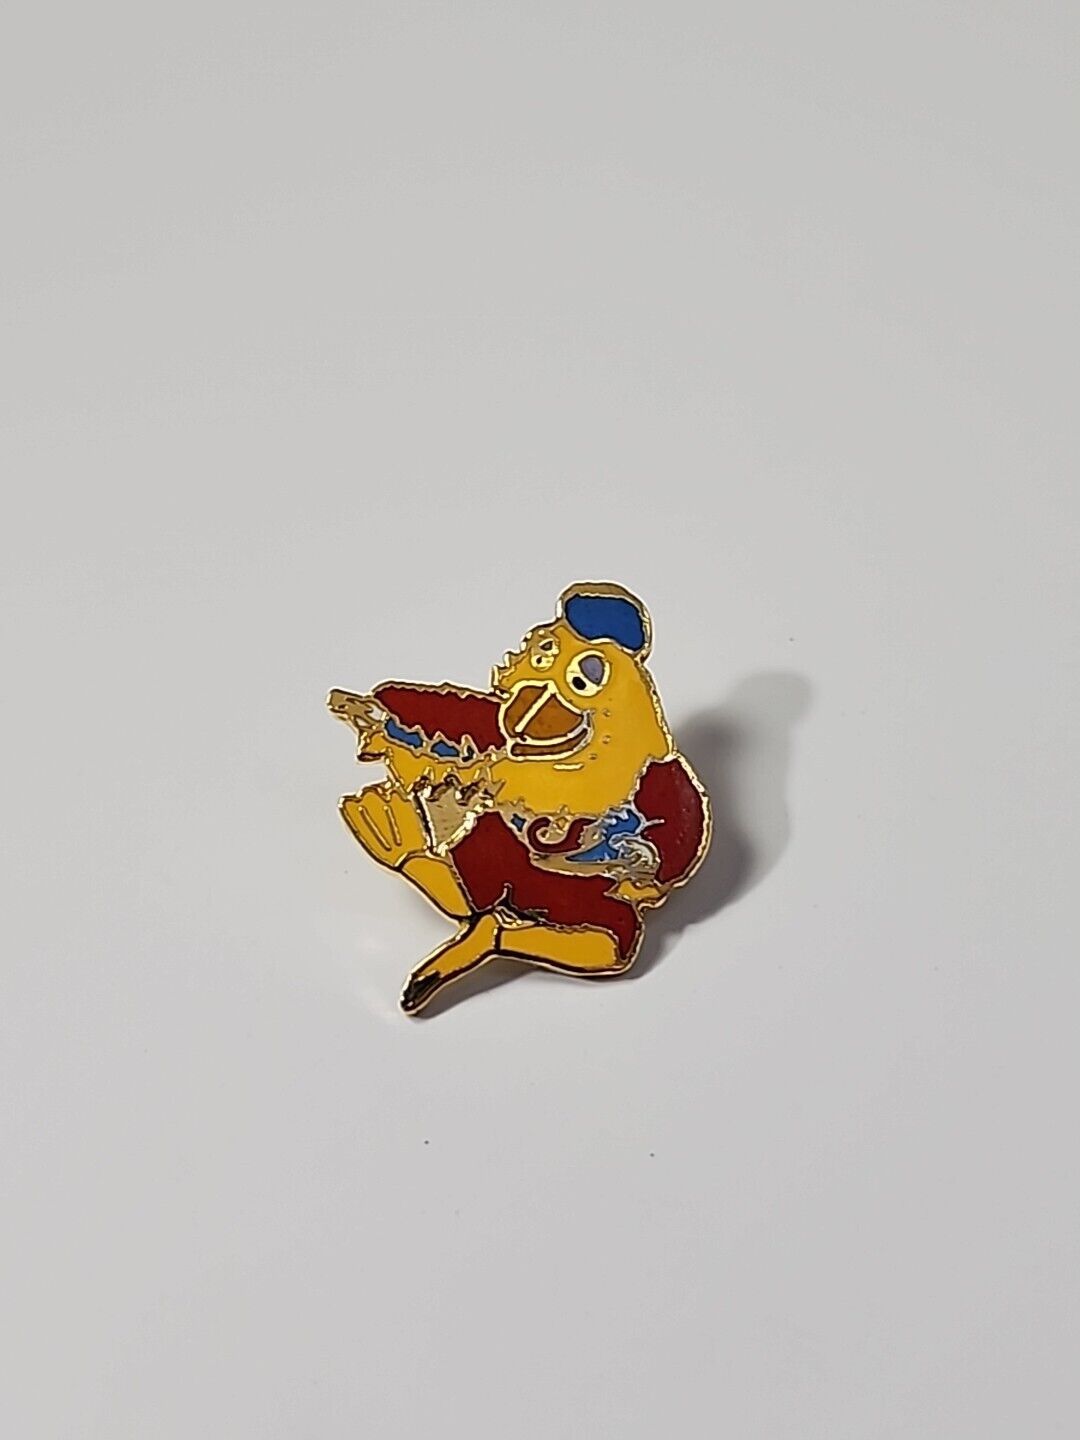 San Diego Padres The Chicken Mascot Lapel Pin Small Size Vintage 1981 Rare